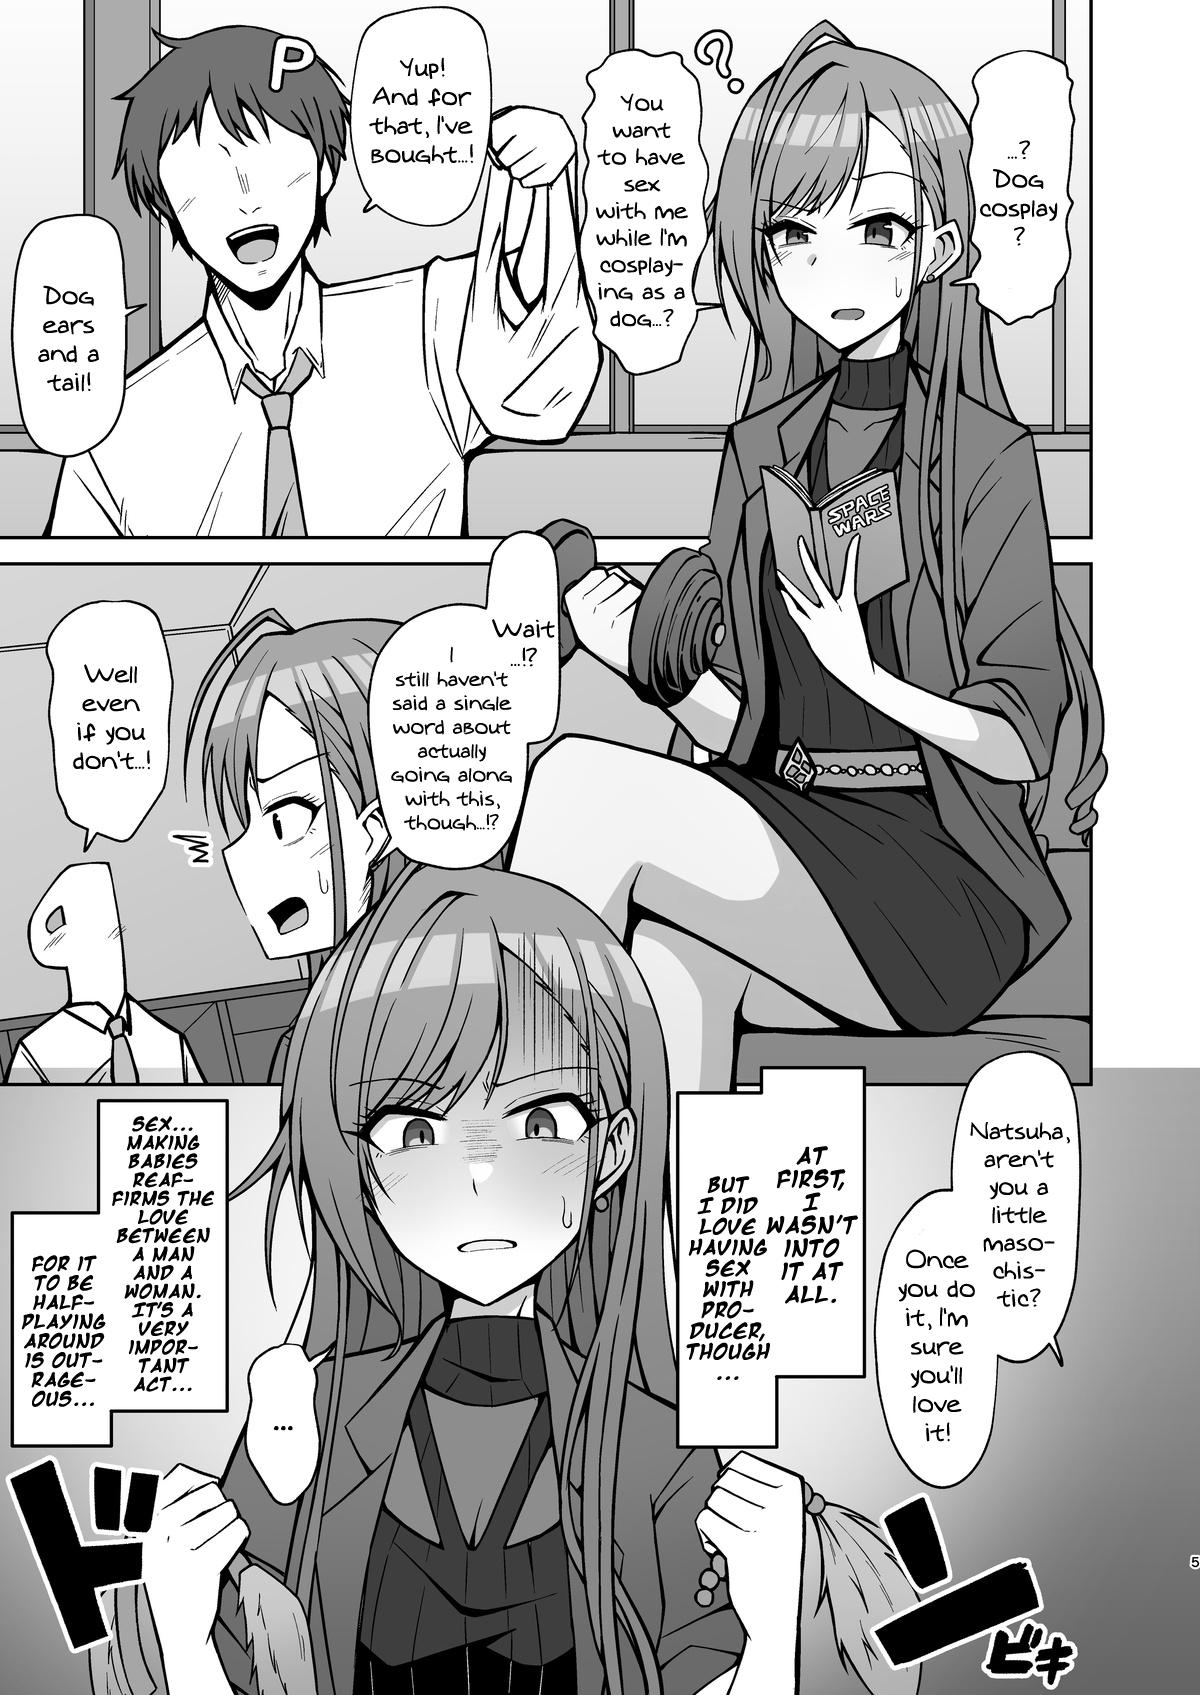 Tight Ass InuCos H tte Sugoi no yo! | Fucking While Dressed Like a Dog Feels Amazing! - The idolmaster Dutch - Page 4